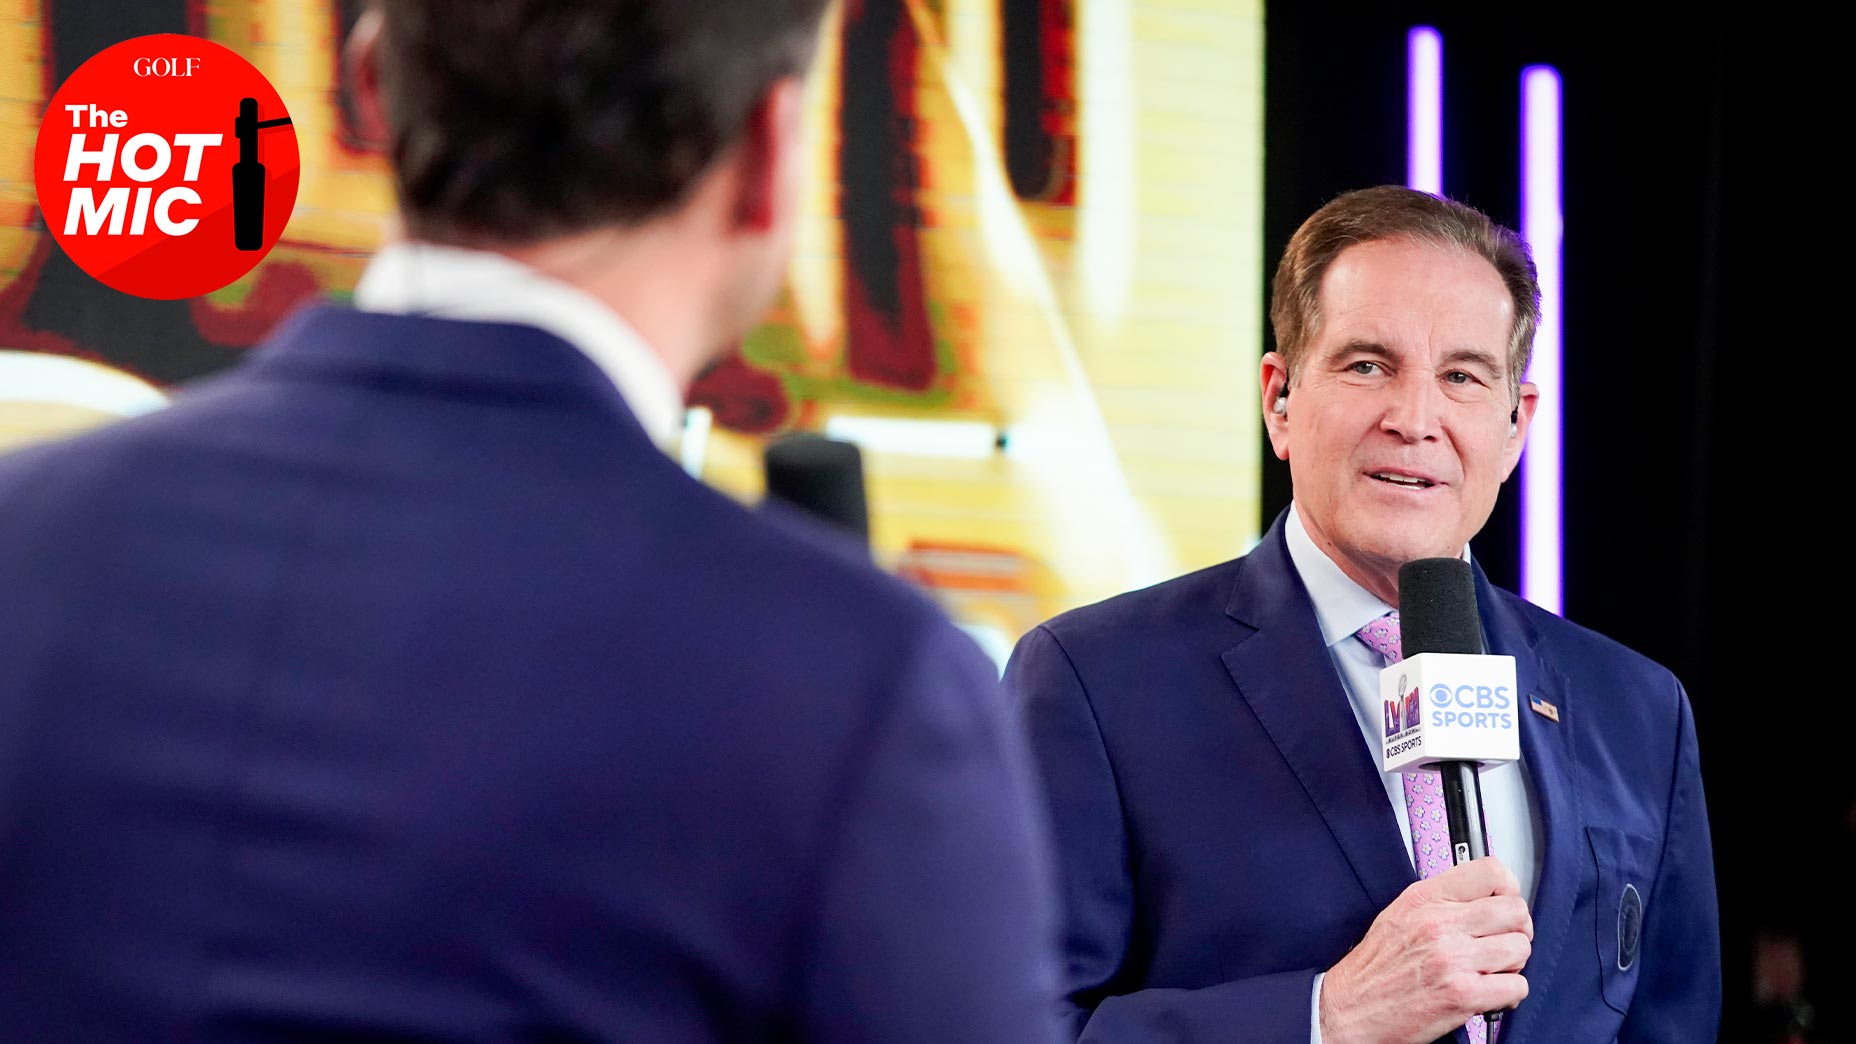 jim nantz stares at partner and speaks at the super bowl in suit